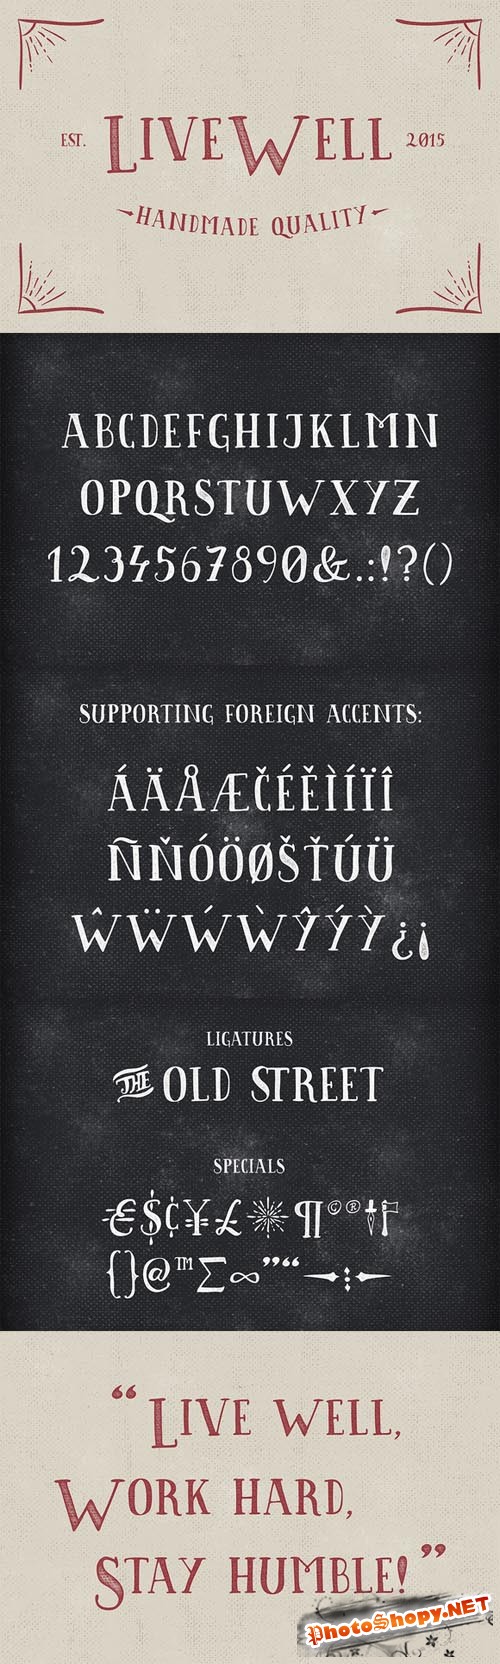 Font OTF - Livewell Typeface